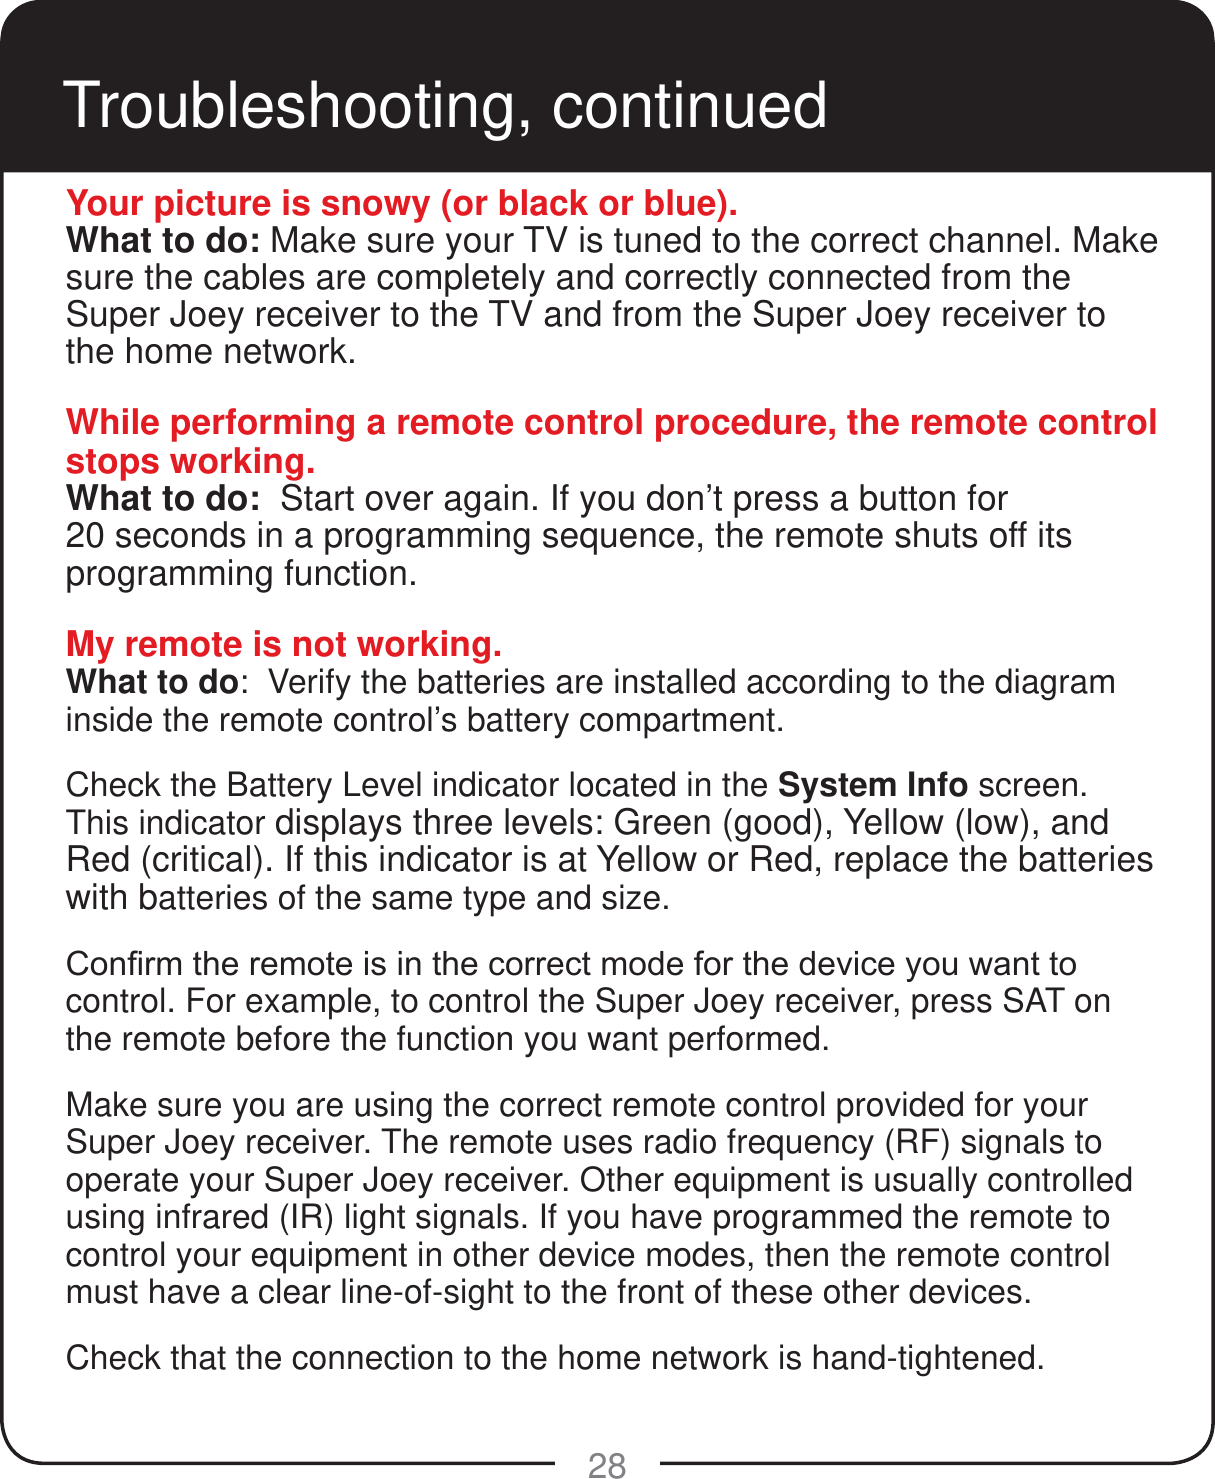 28Troubleshooting, continuedYour picture is snowy (or black or blue).What to do: Make sure your TV is tuned to the correct channel. Make sure the cables are completely and correctly connected from the Super Joey receiver to the TV and from the Super Joey receiver to the home network.While performing a remote control procedure, the remote control stops working.What to do:  Start over again. If you don’t press a button for  20 seconds in a programming sequence, the remote shuts off its programming function.My remote is not working.What to do:  Verify the batteries are installed according to the diagram inside the remote control’s battery compartment.  Check the Battery Level indicator located in the System Info screen. This indicator displays three levels: Green (good), Yellow (low), and Red (critical). If this indicator is at Yellow or Red, replace the batteries with batteries of the same type and size. &amp;RQ¿UPWKHUHPRWHLVLQWKHFRUUHFWPRGHIRUWKHGHYLFH\RXZDQWWRcontrol. For example, to control the Super Joey receiver, press SAT on the remote before the function you want performed.Make sure you are using the correct remote control provided for your Super Joey receiver. The remote uses radio frequency (RF) signals to operate your Super Joey receiver. Other equipment is usually controlled using infrared (IR) light signals. If you have programmed the remote to control your equipment in other device modes, then the remote control must have a clear line-of-sight to the front of these other devices.Check that the connection to the home network is hand-tightened.